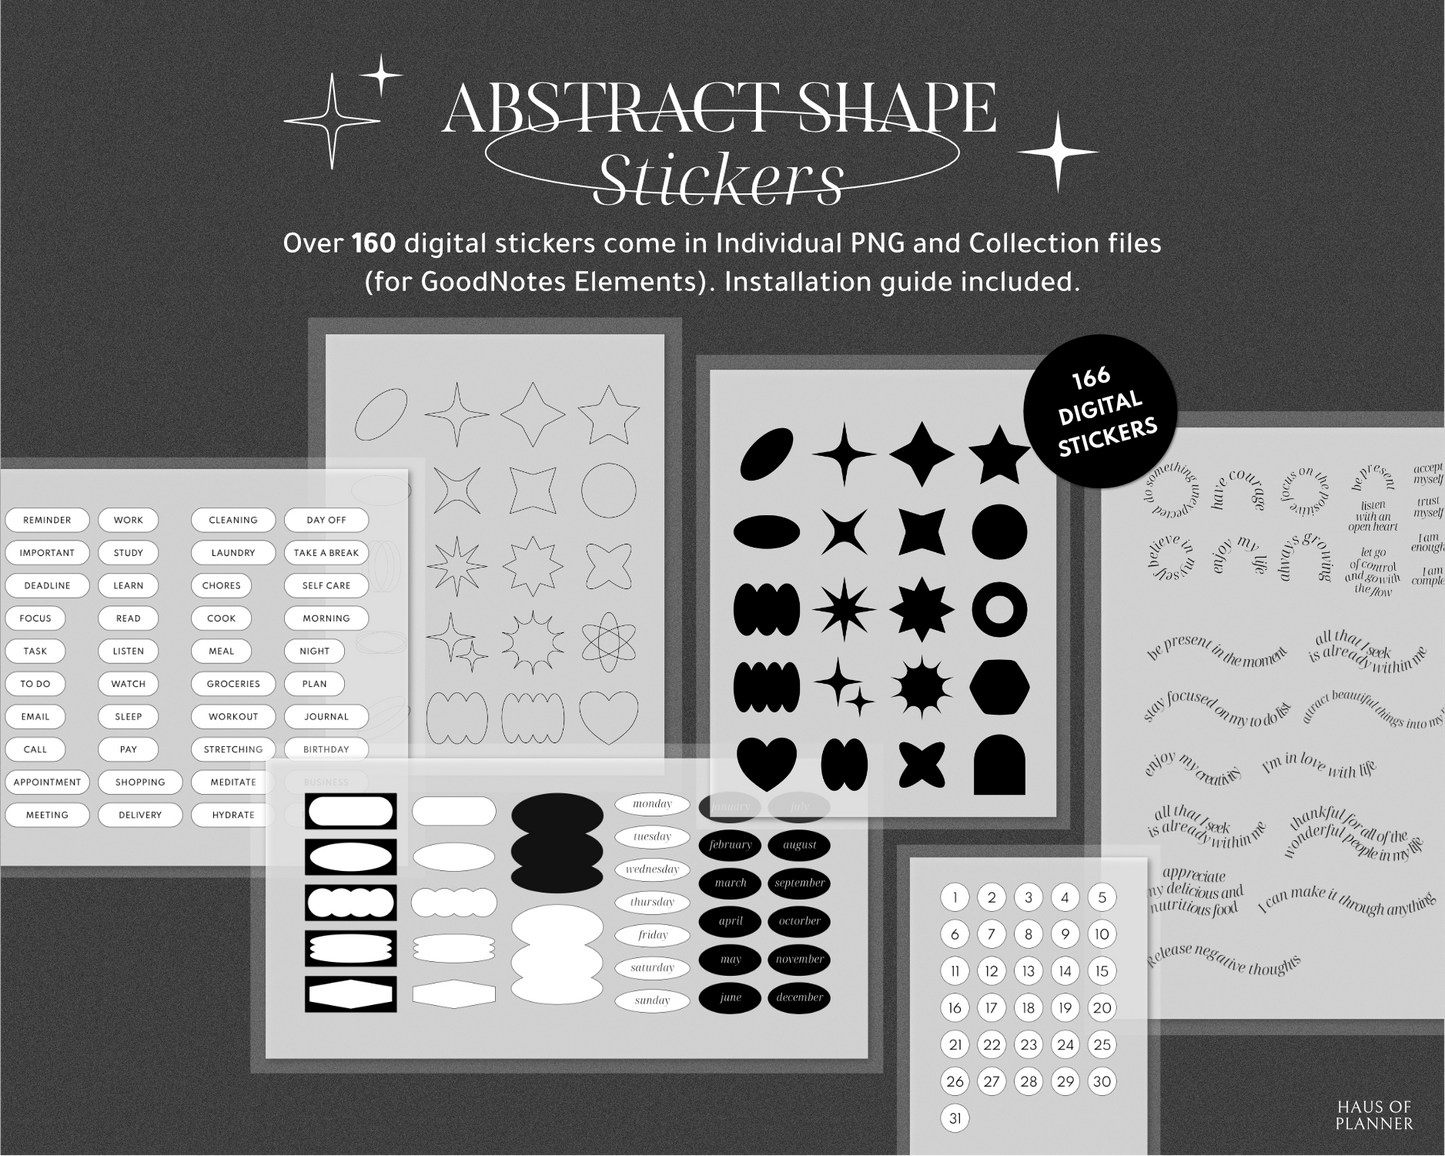 Abstract Shape Stickers